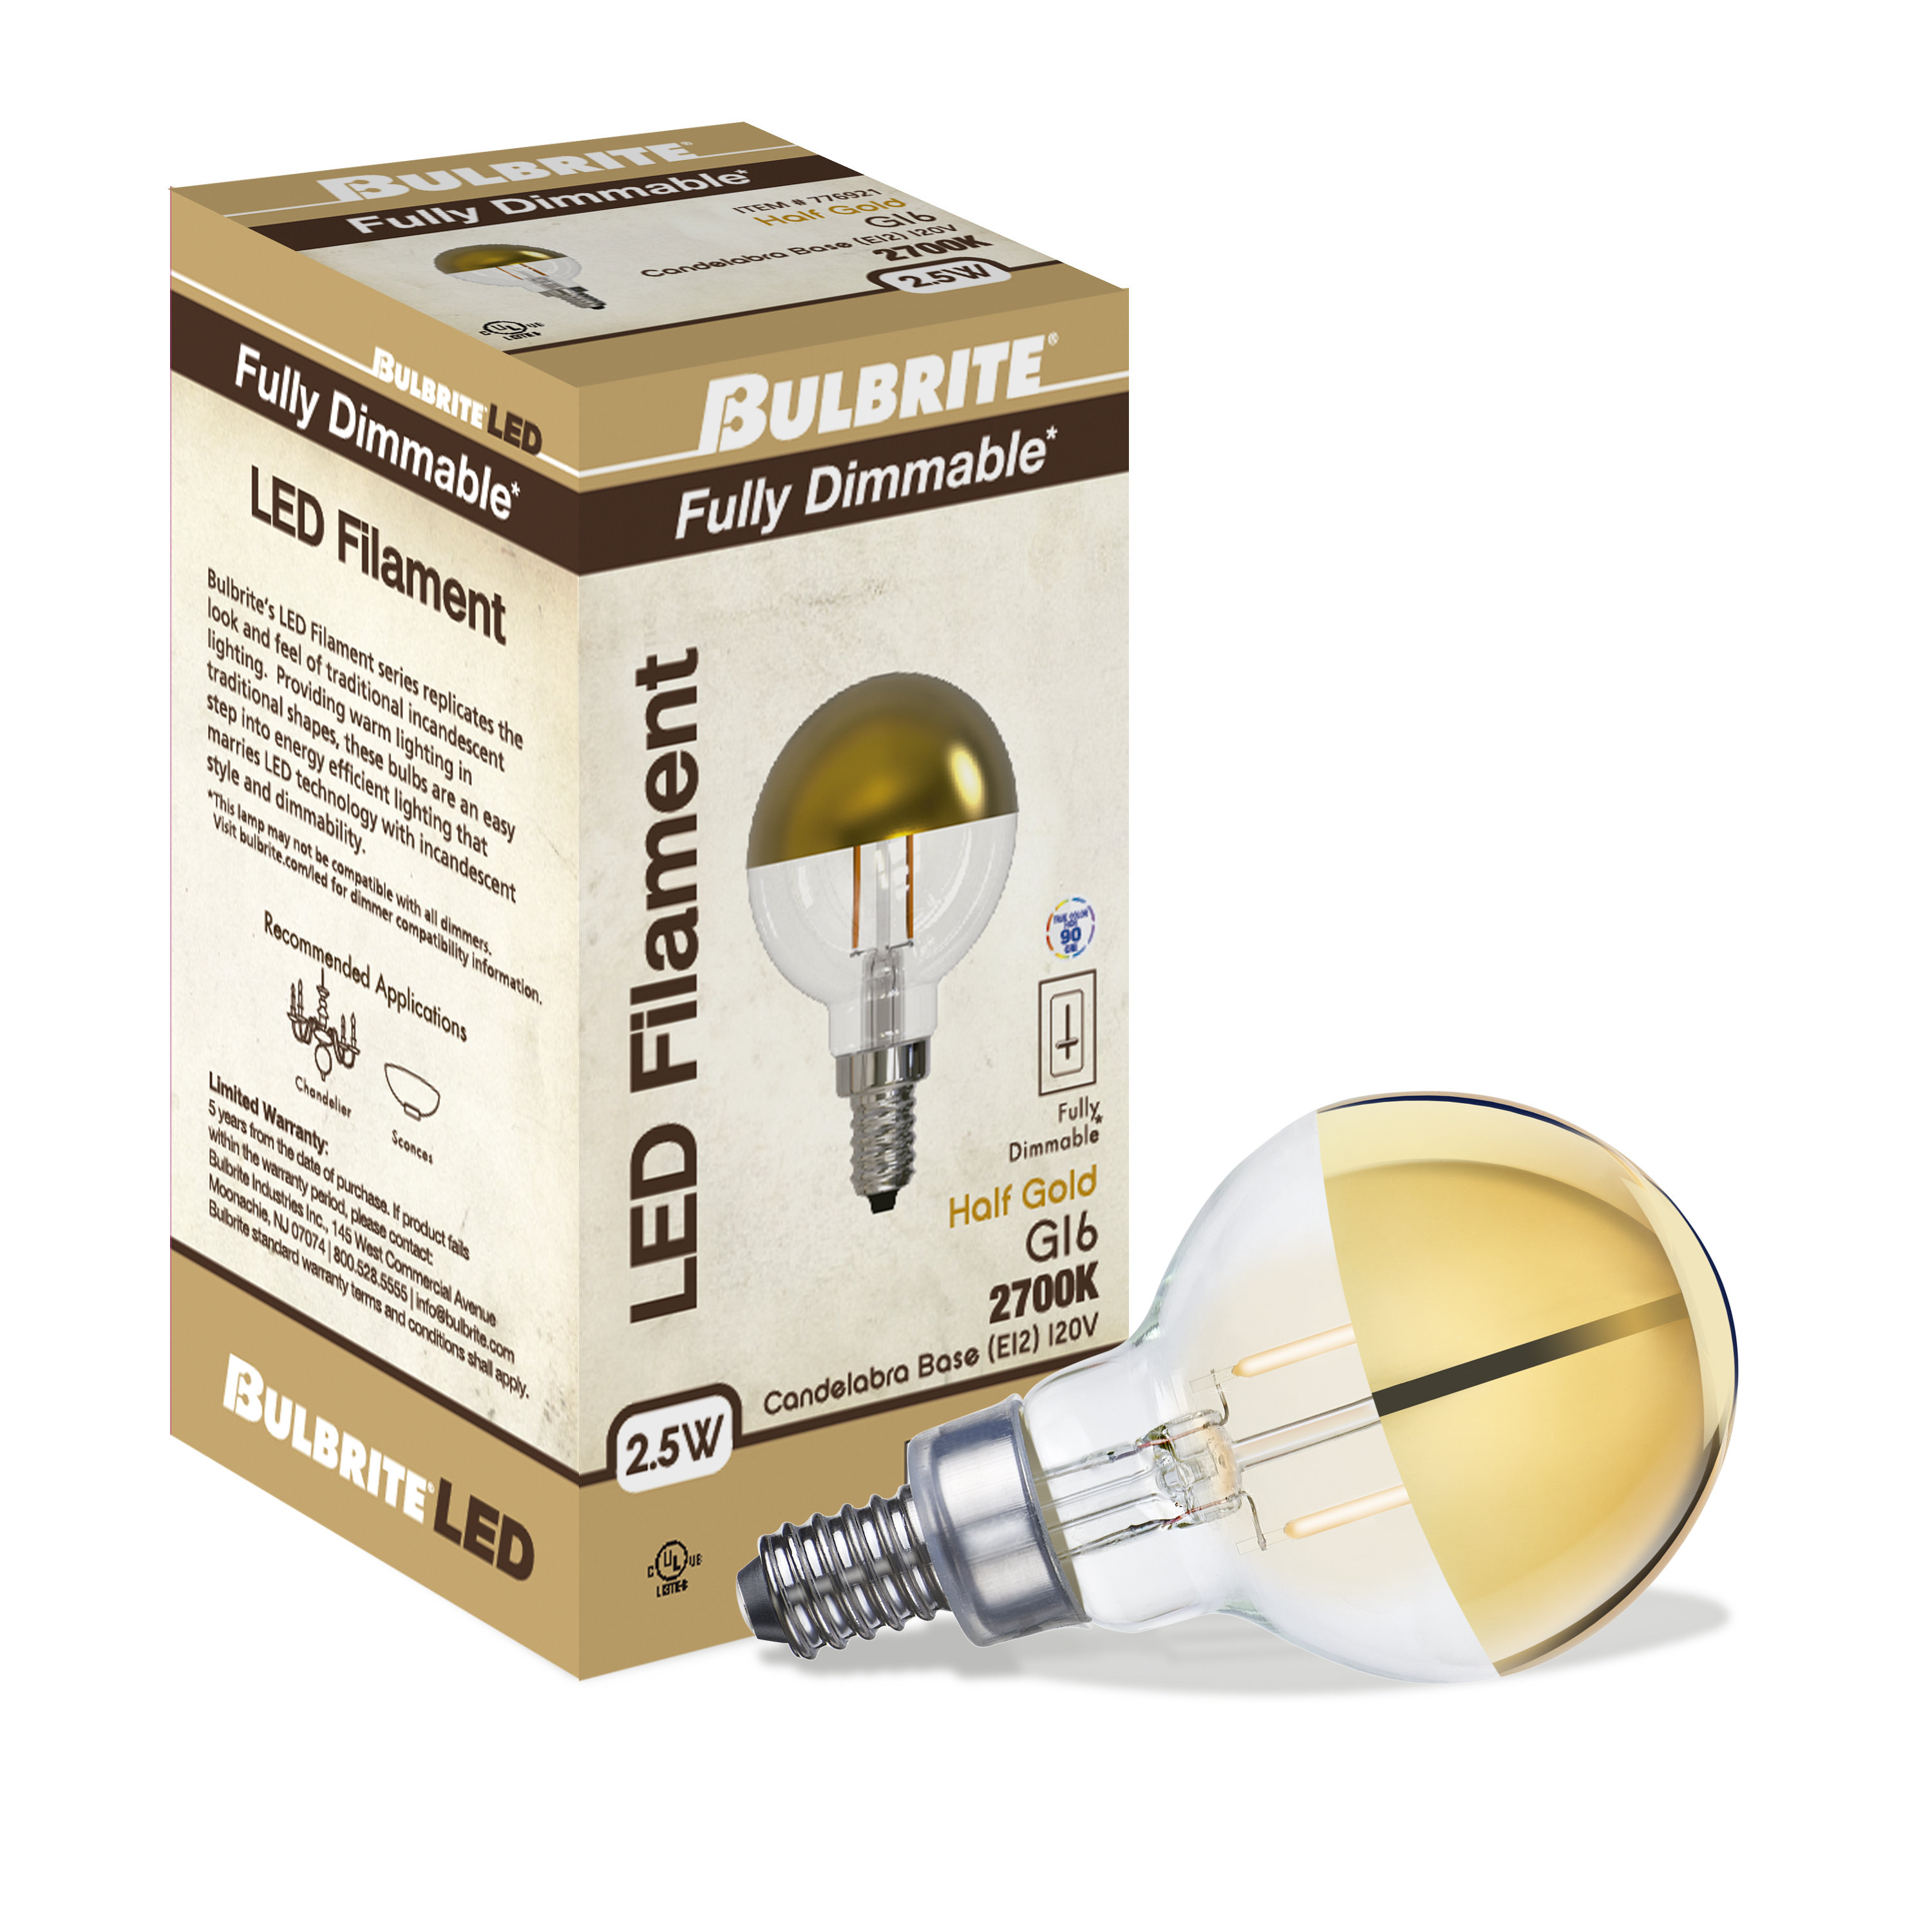 LED candle E14 4 W filament, 2,700 K switch dimmer